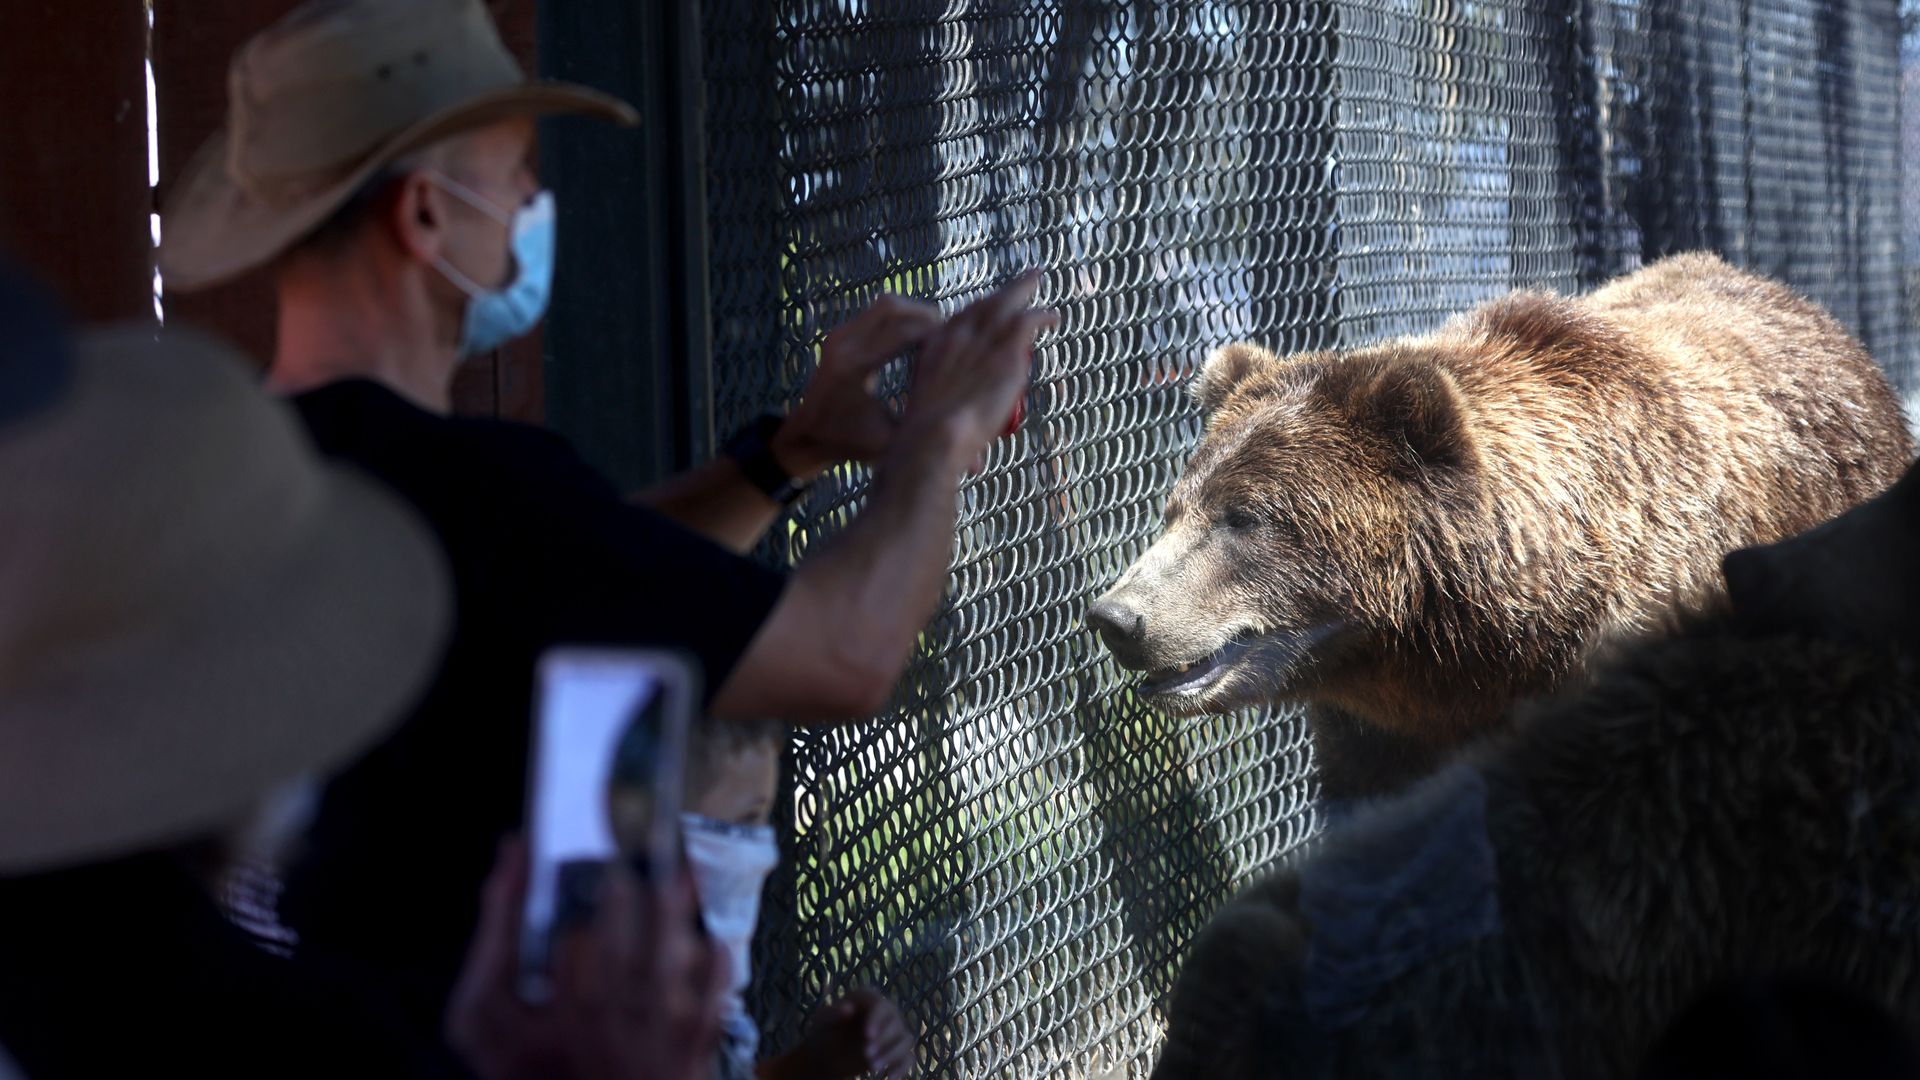 People take photos of grizzly bears in the Oakland Zoo on July 29.